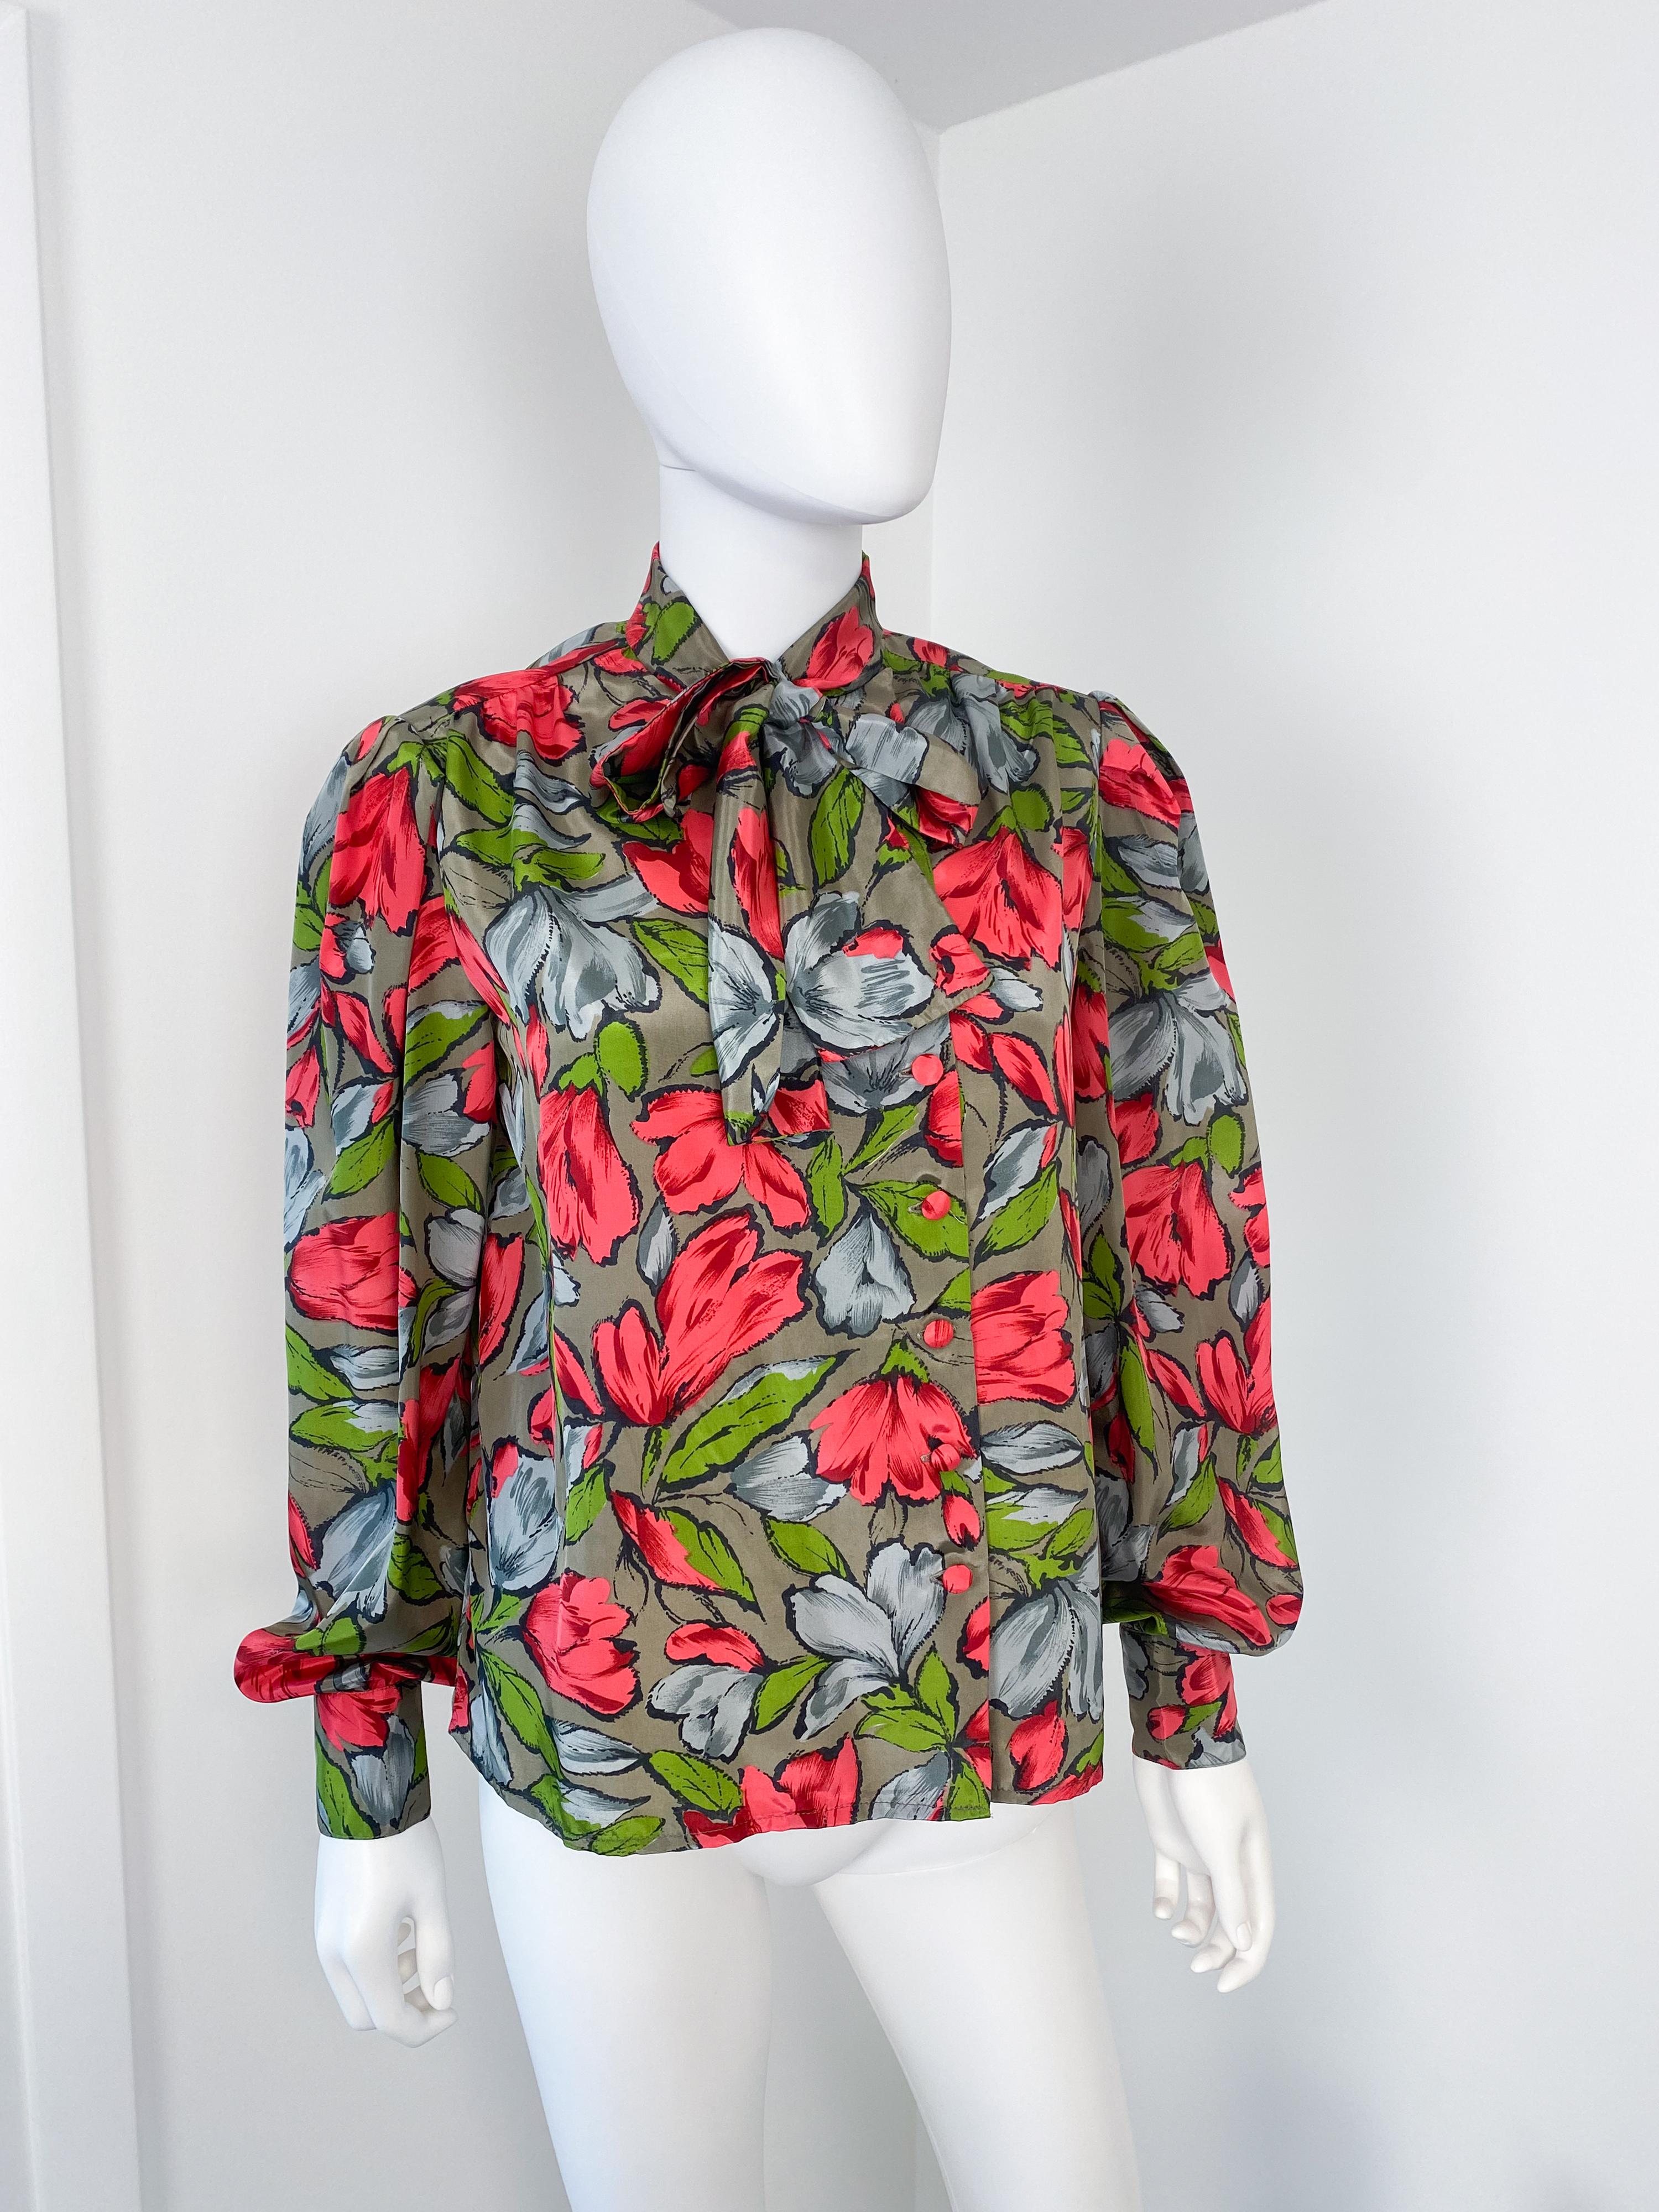 Women's Vintage 1980s Silky Polyester Blouse Top Red and Gray Flowers Size 8/10 For Sale